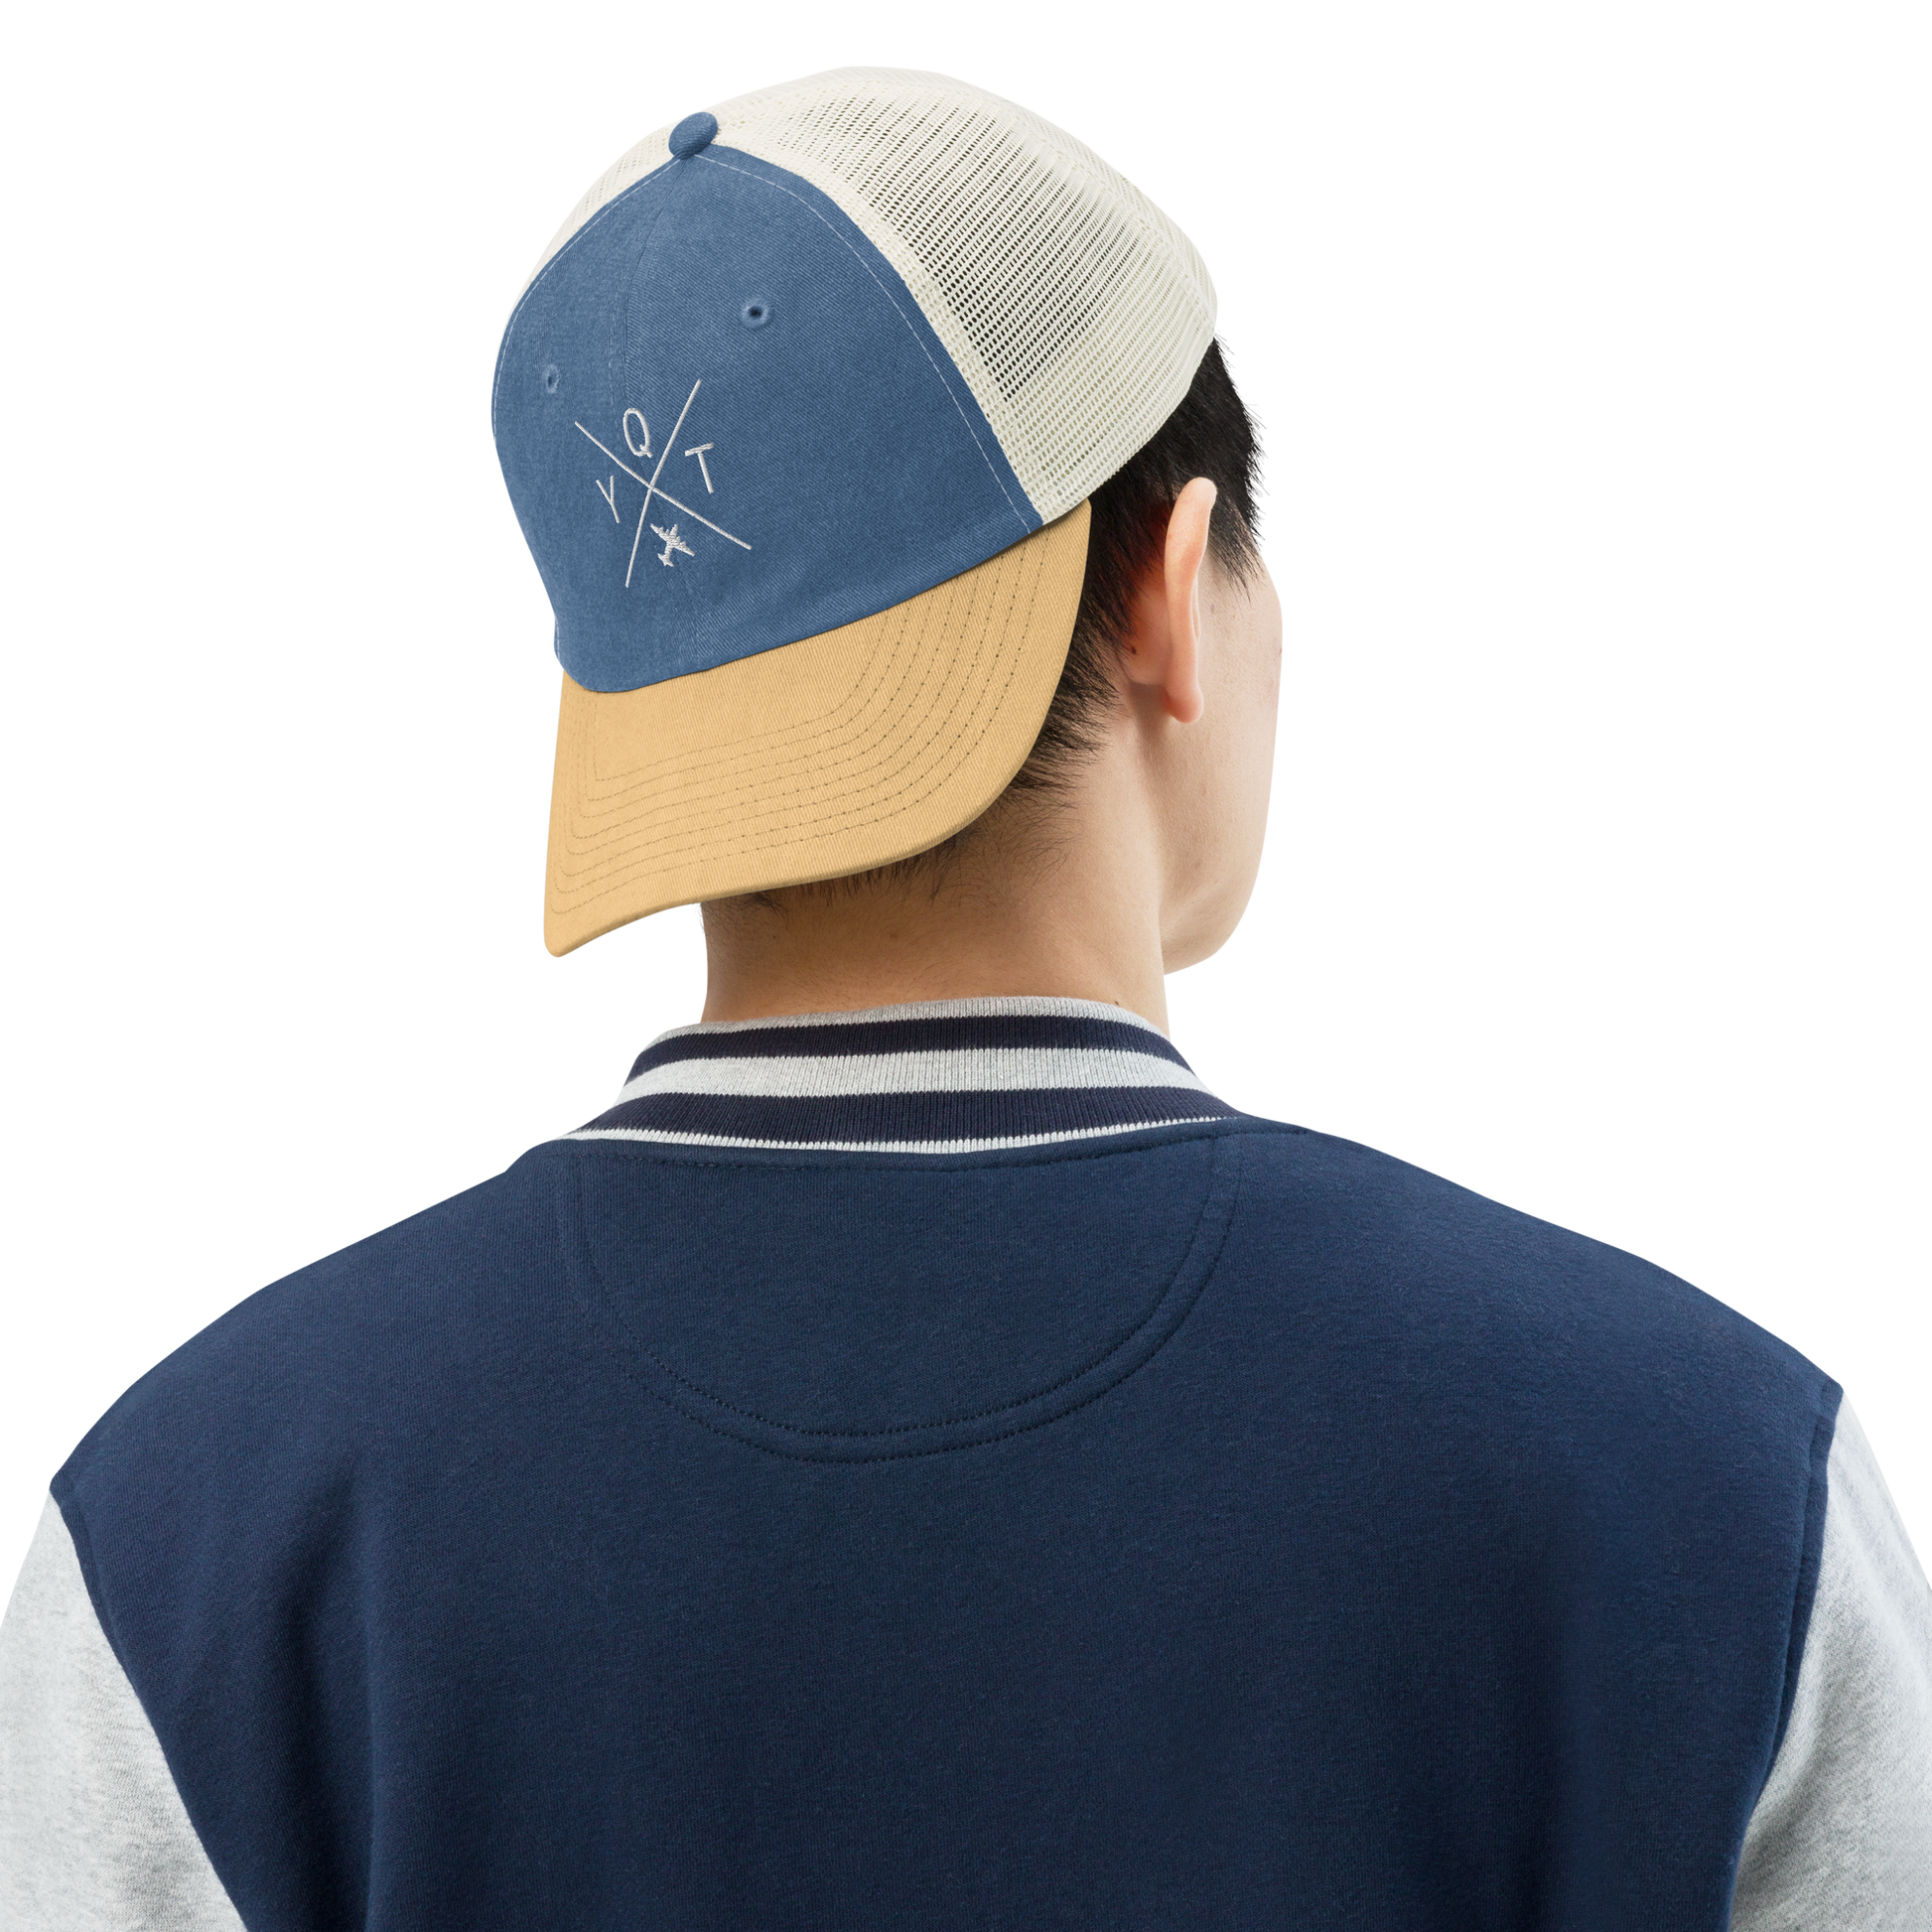 YHM Designs - YQT Thunder Bay Pigment-Dyed Trucker Cap - Crossed-X Design with Airport Code and Vintage Propliner - White Embroidery - Image 04